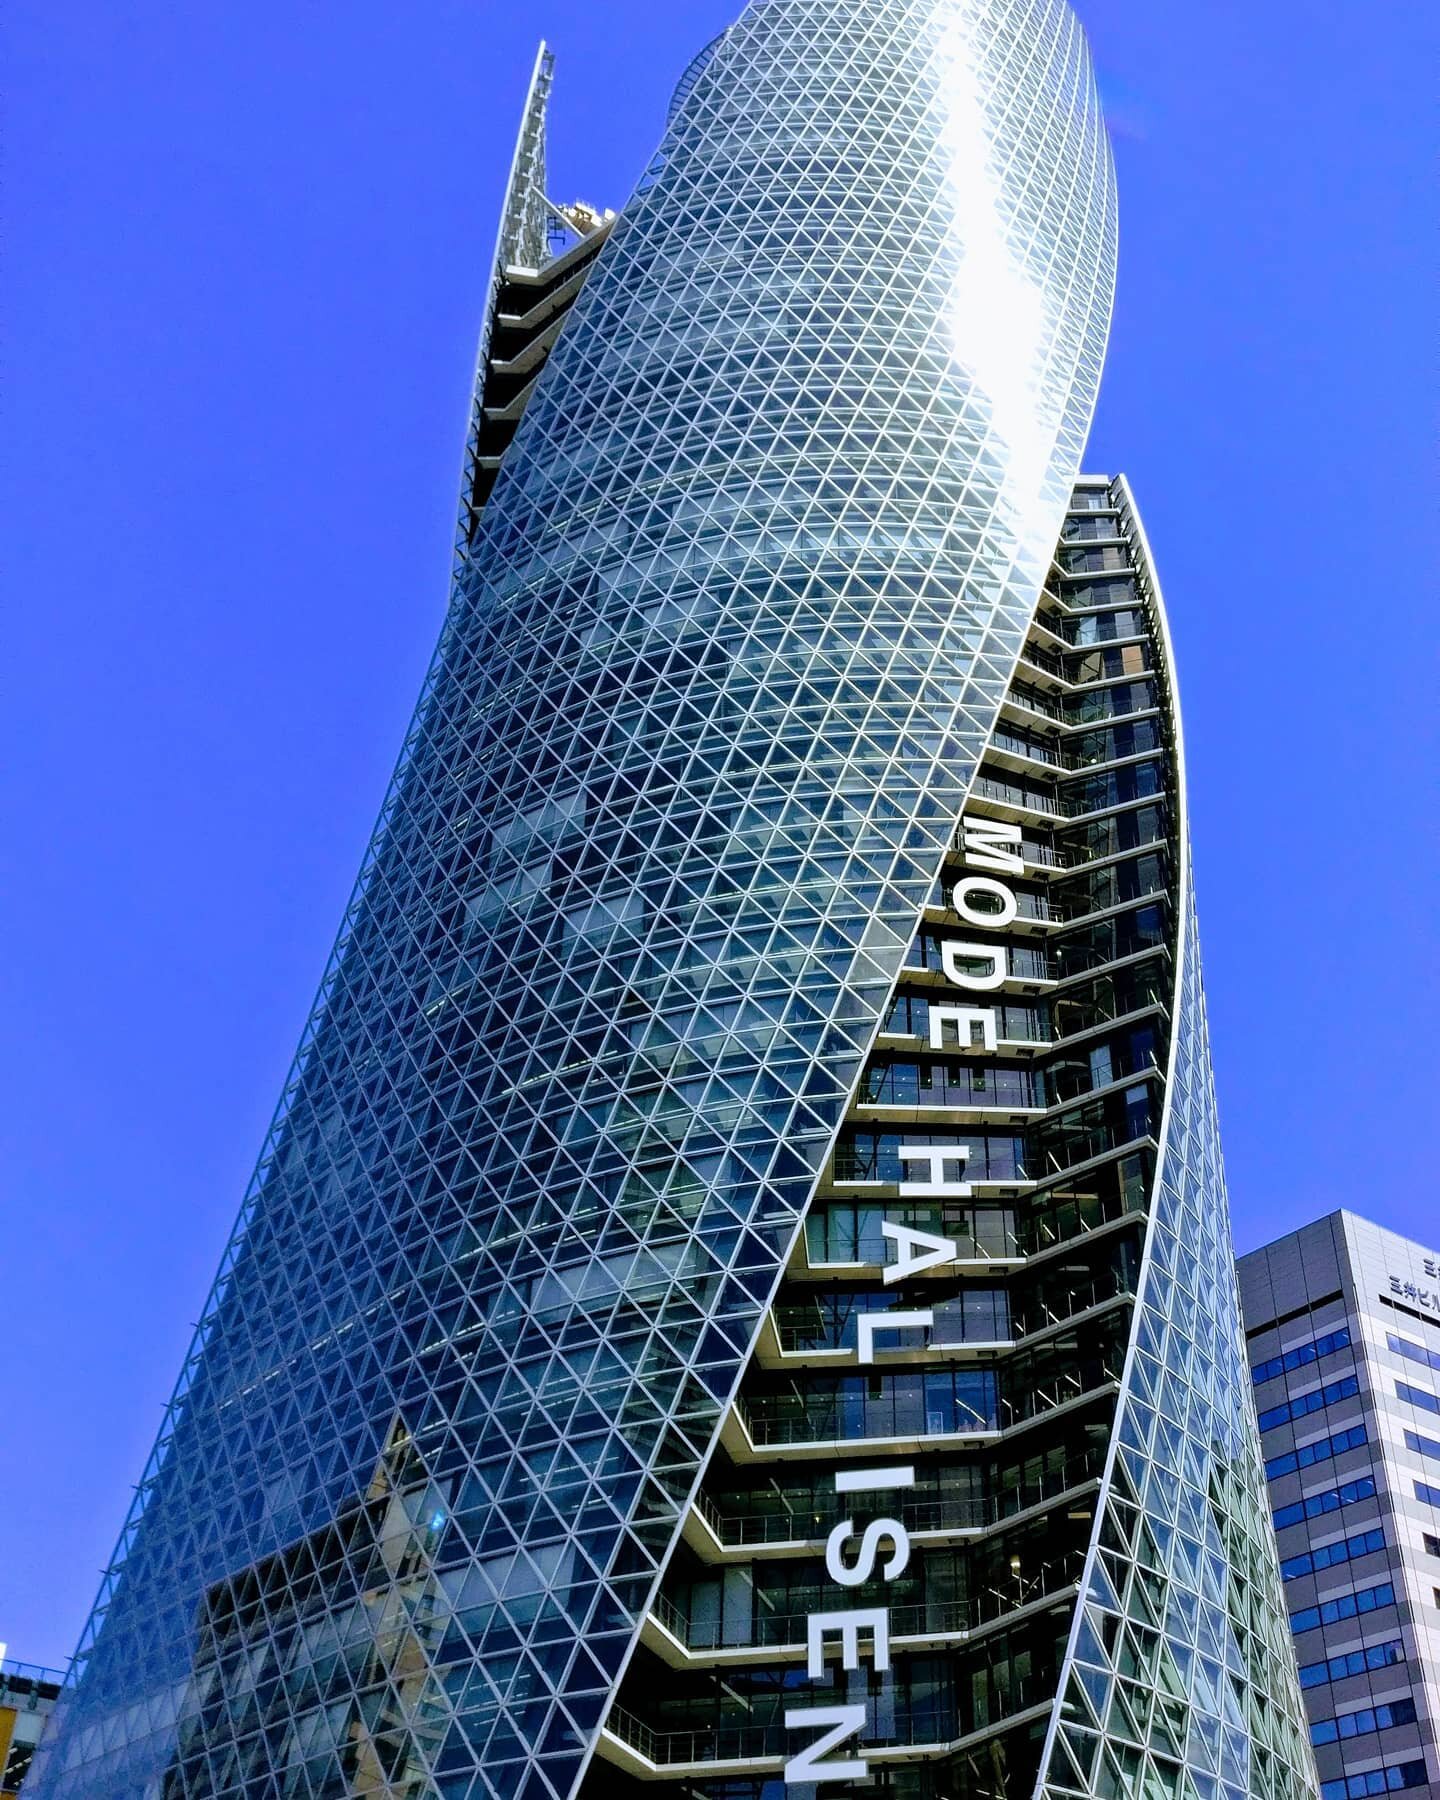 The Mode Hal Isen tower in Nagoya Japan is an educational facility with three schools. The building was designed by Nikken Sekkei and constructed by Obayashi Corporation. The curvy tower greets visitors walking out of the main train station. The use 